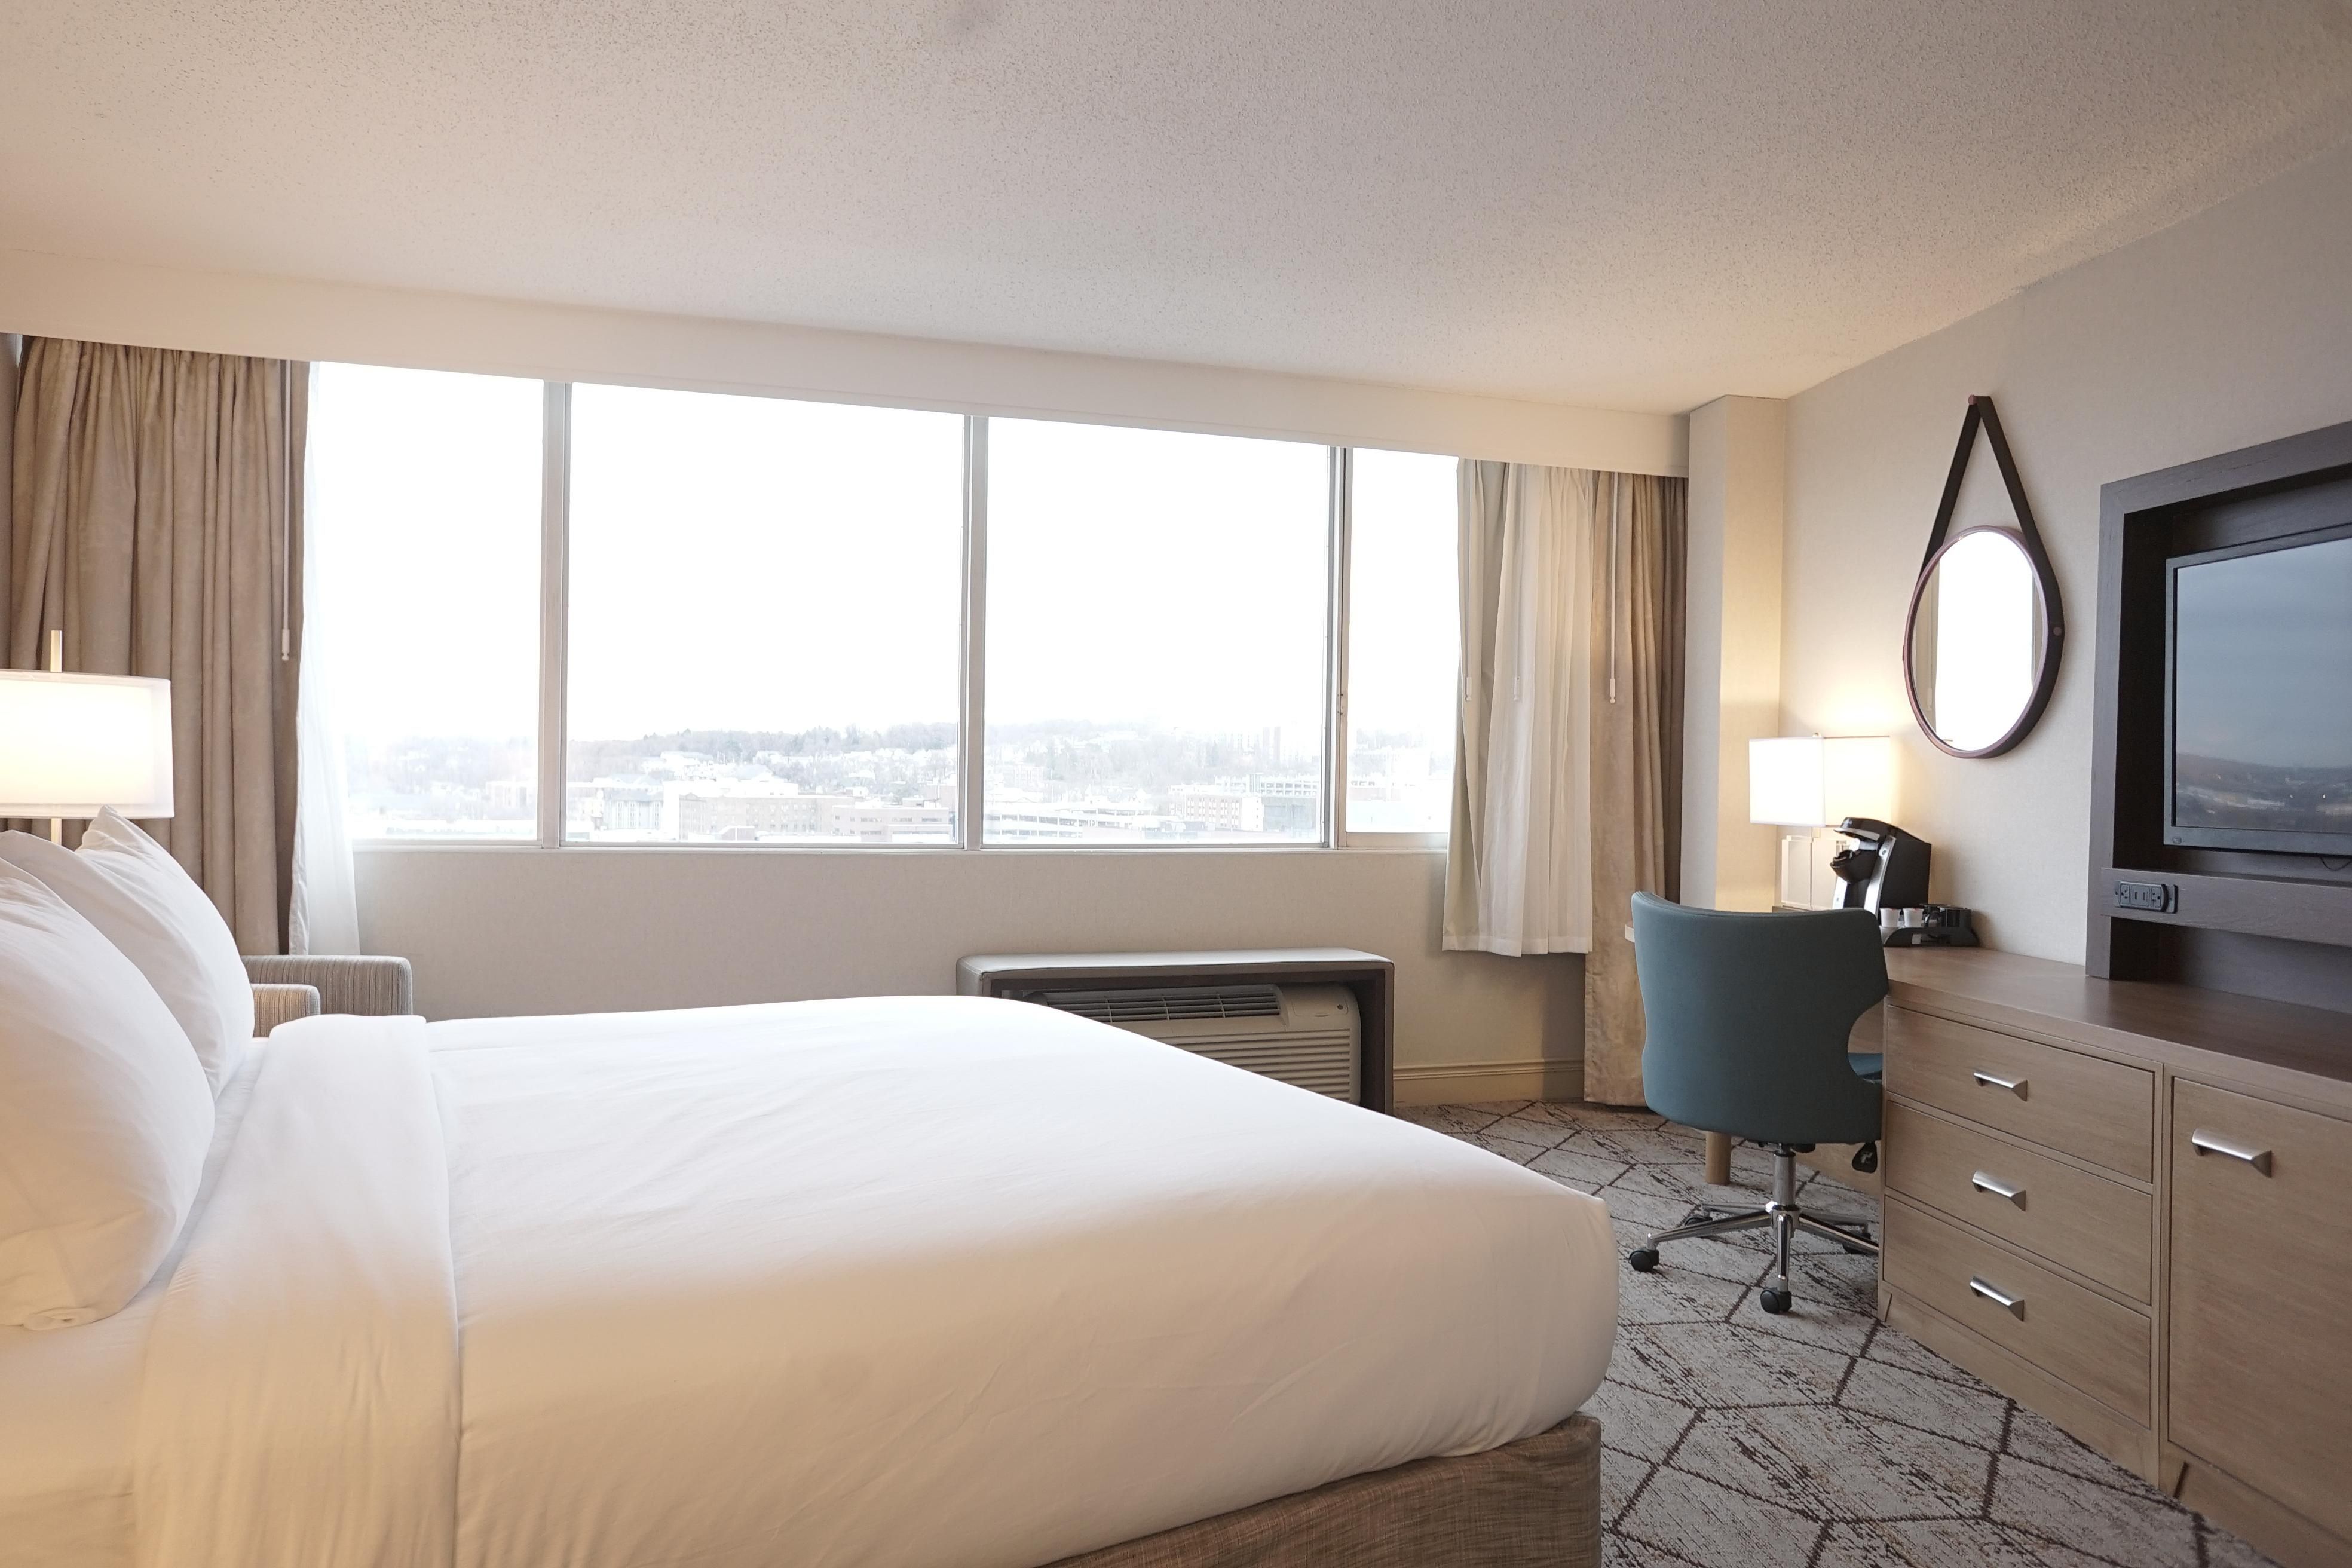 Our king bedrooms with a view of Syracuse.